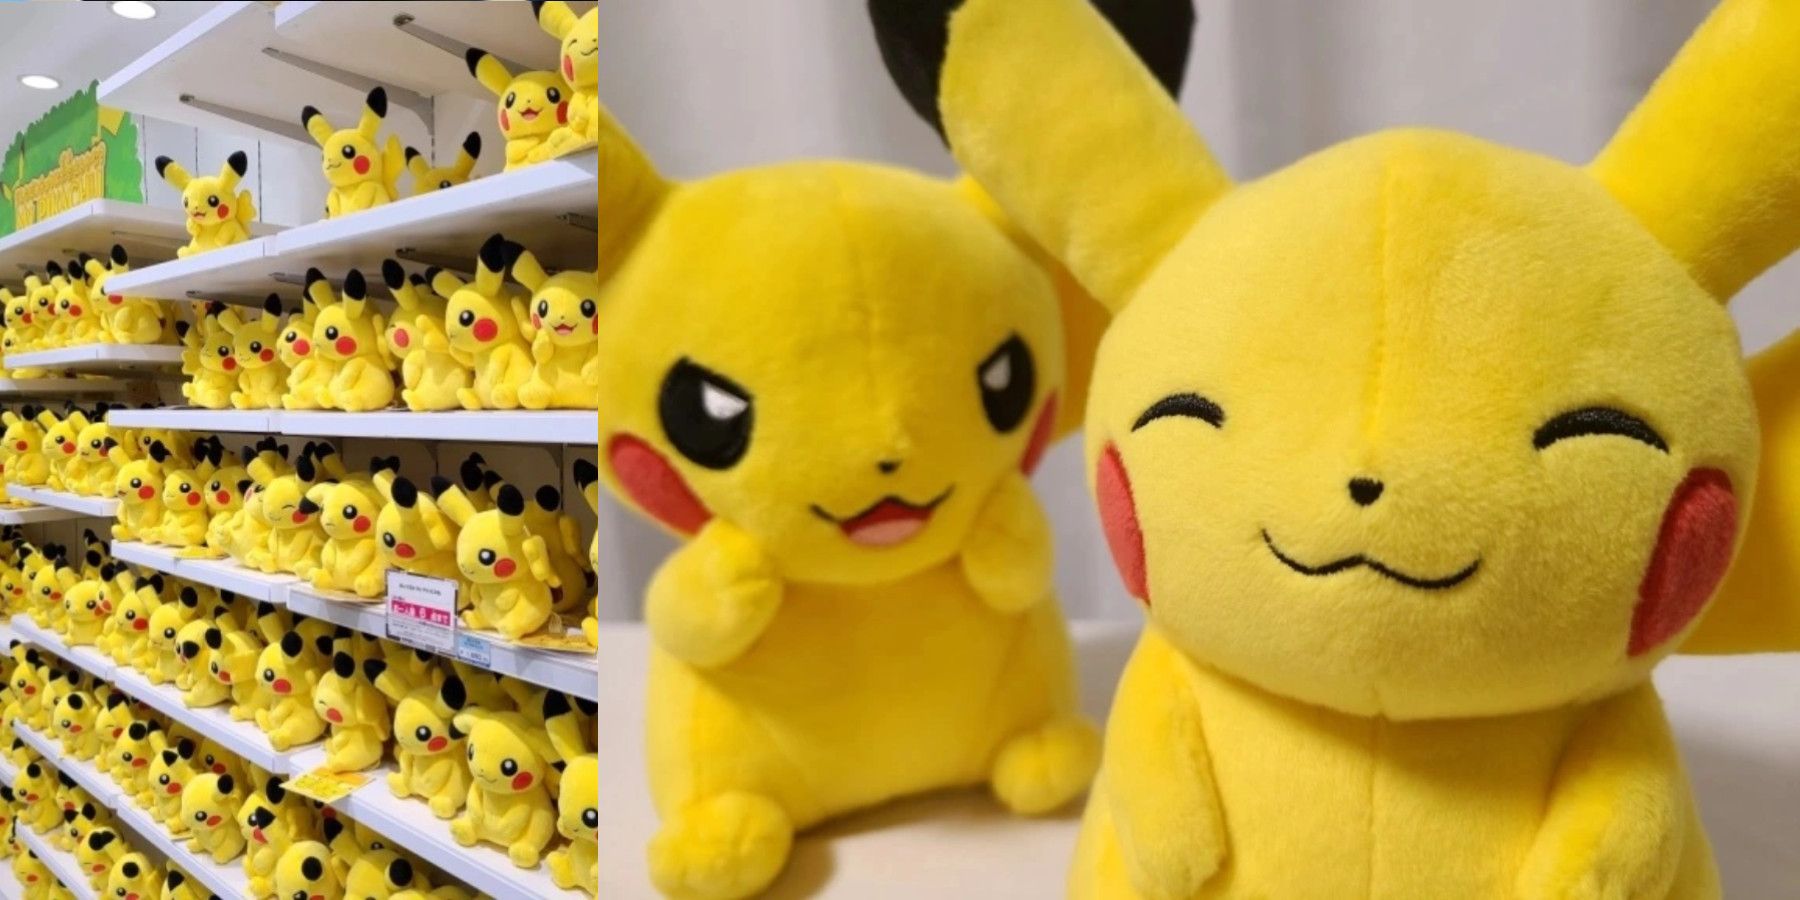 You Can Now Buy Your Own Unique Pikachu Plushie